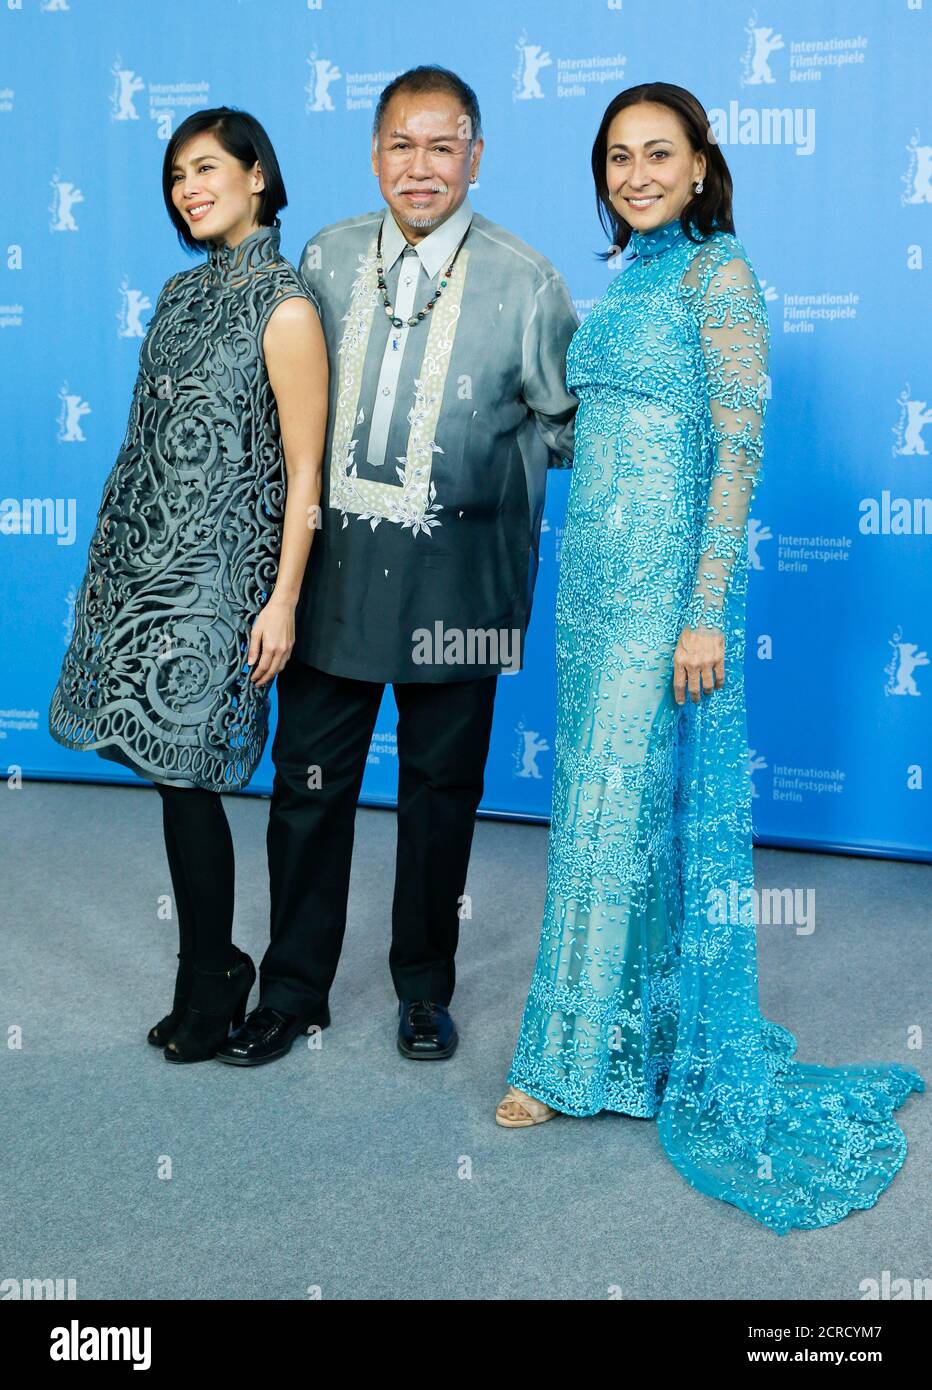 Actors Angel Aquino, Bernardo Bernardo and Cherie Gil (L-R) pose to promote the movie 'A lullaby to the sorrowful mystery' at the 66th Berlinale International Film Festival in Berlin, Germany, February 18, 2016.     REUTERS/Fabrizio Bensch Stock Photo